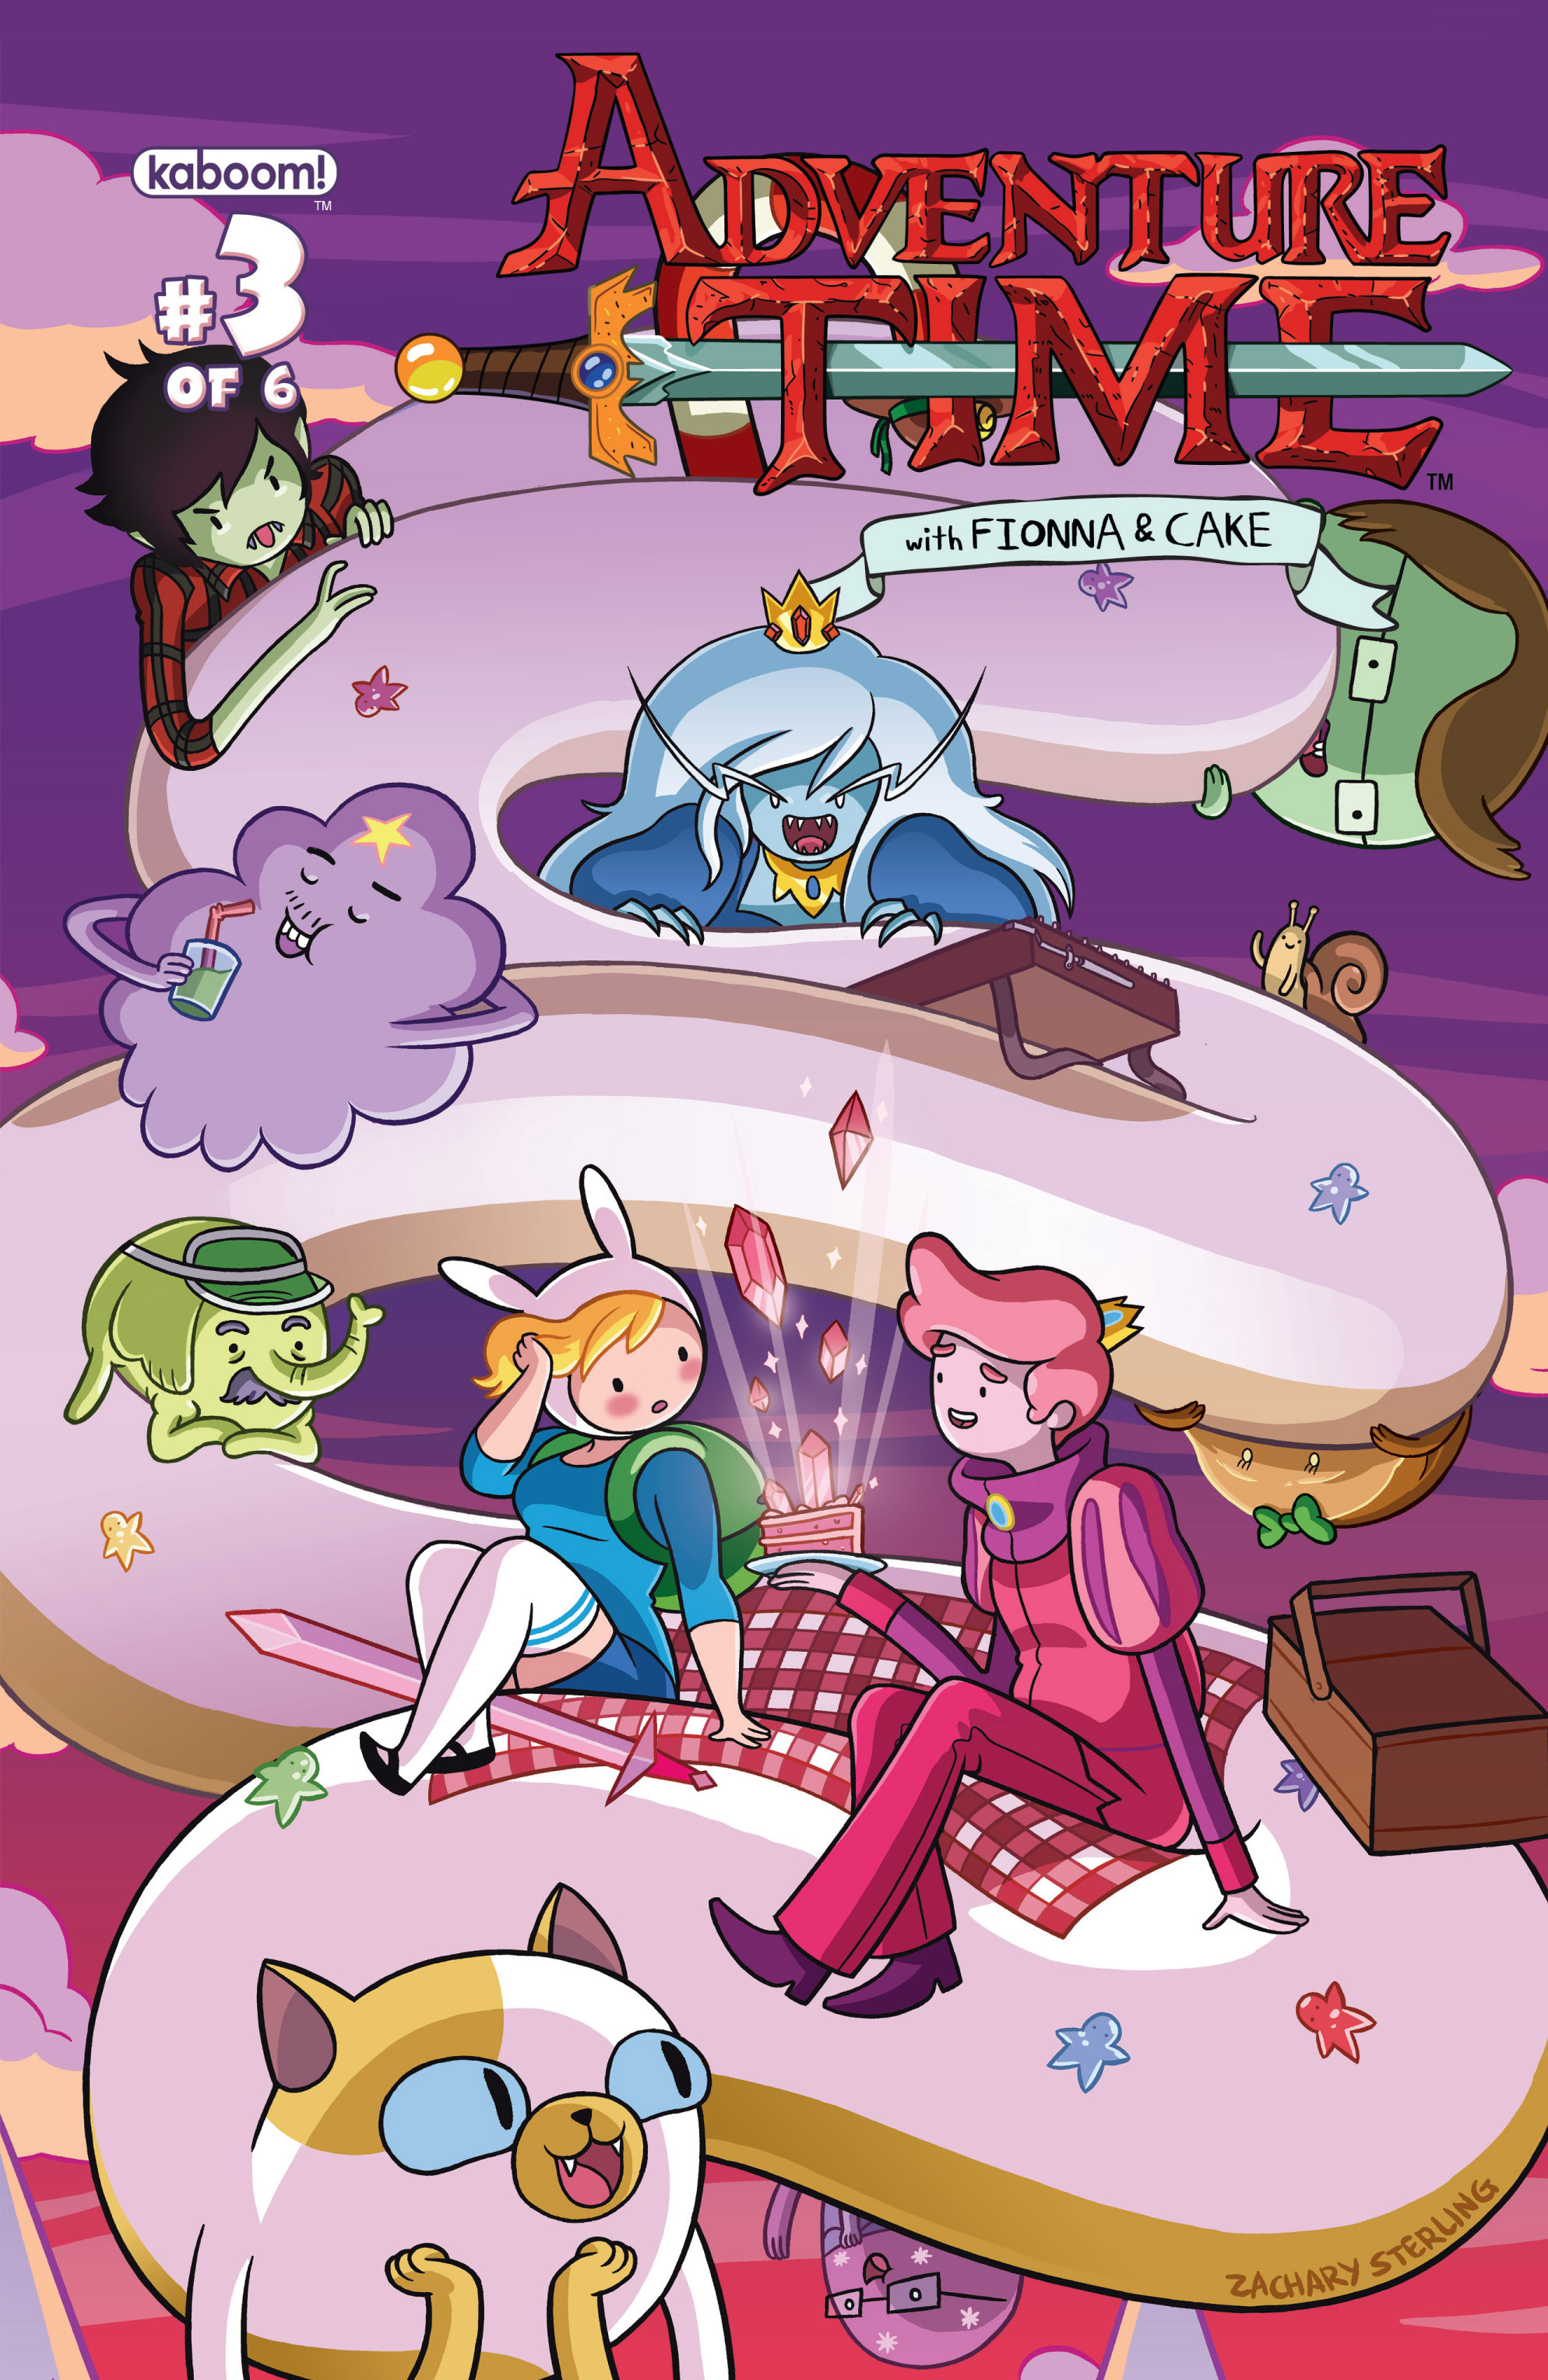 Read online Adventure Time with Fionna & Cake comic -  Issue #3 - 2